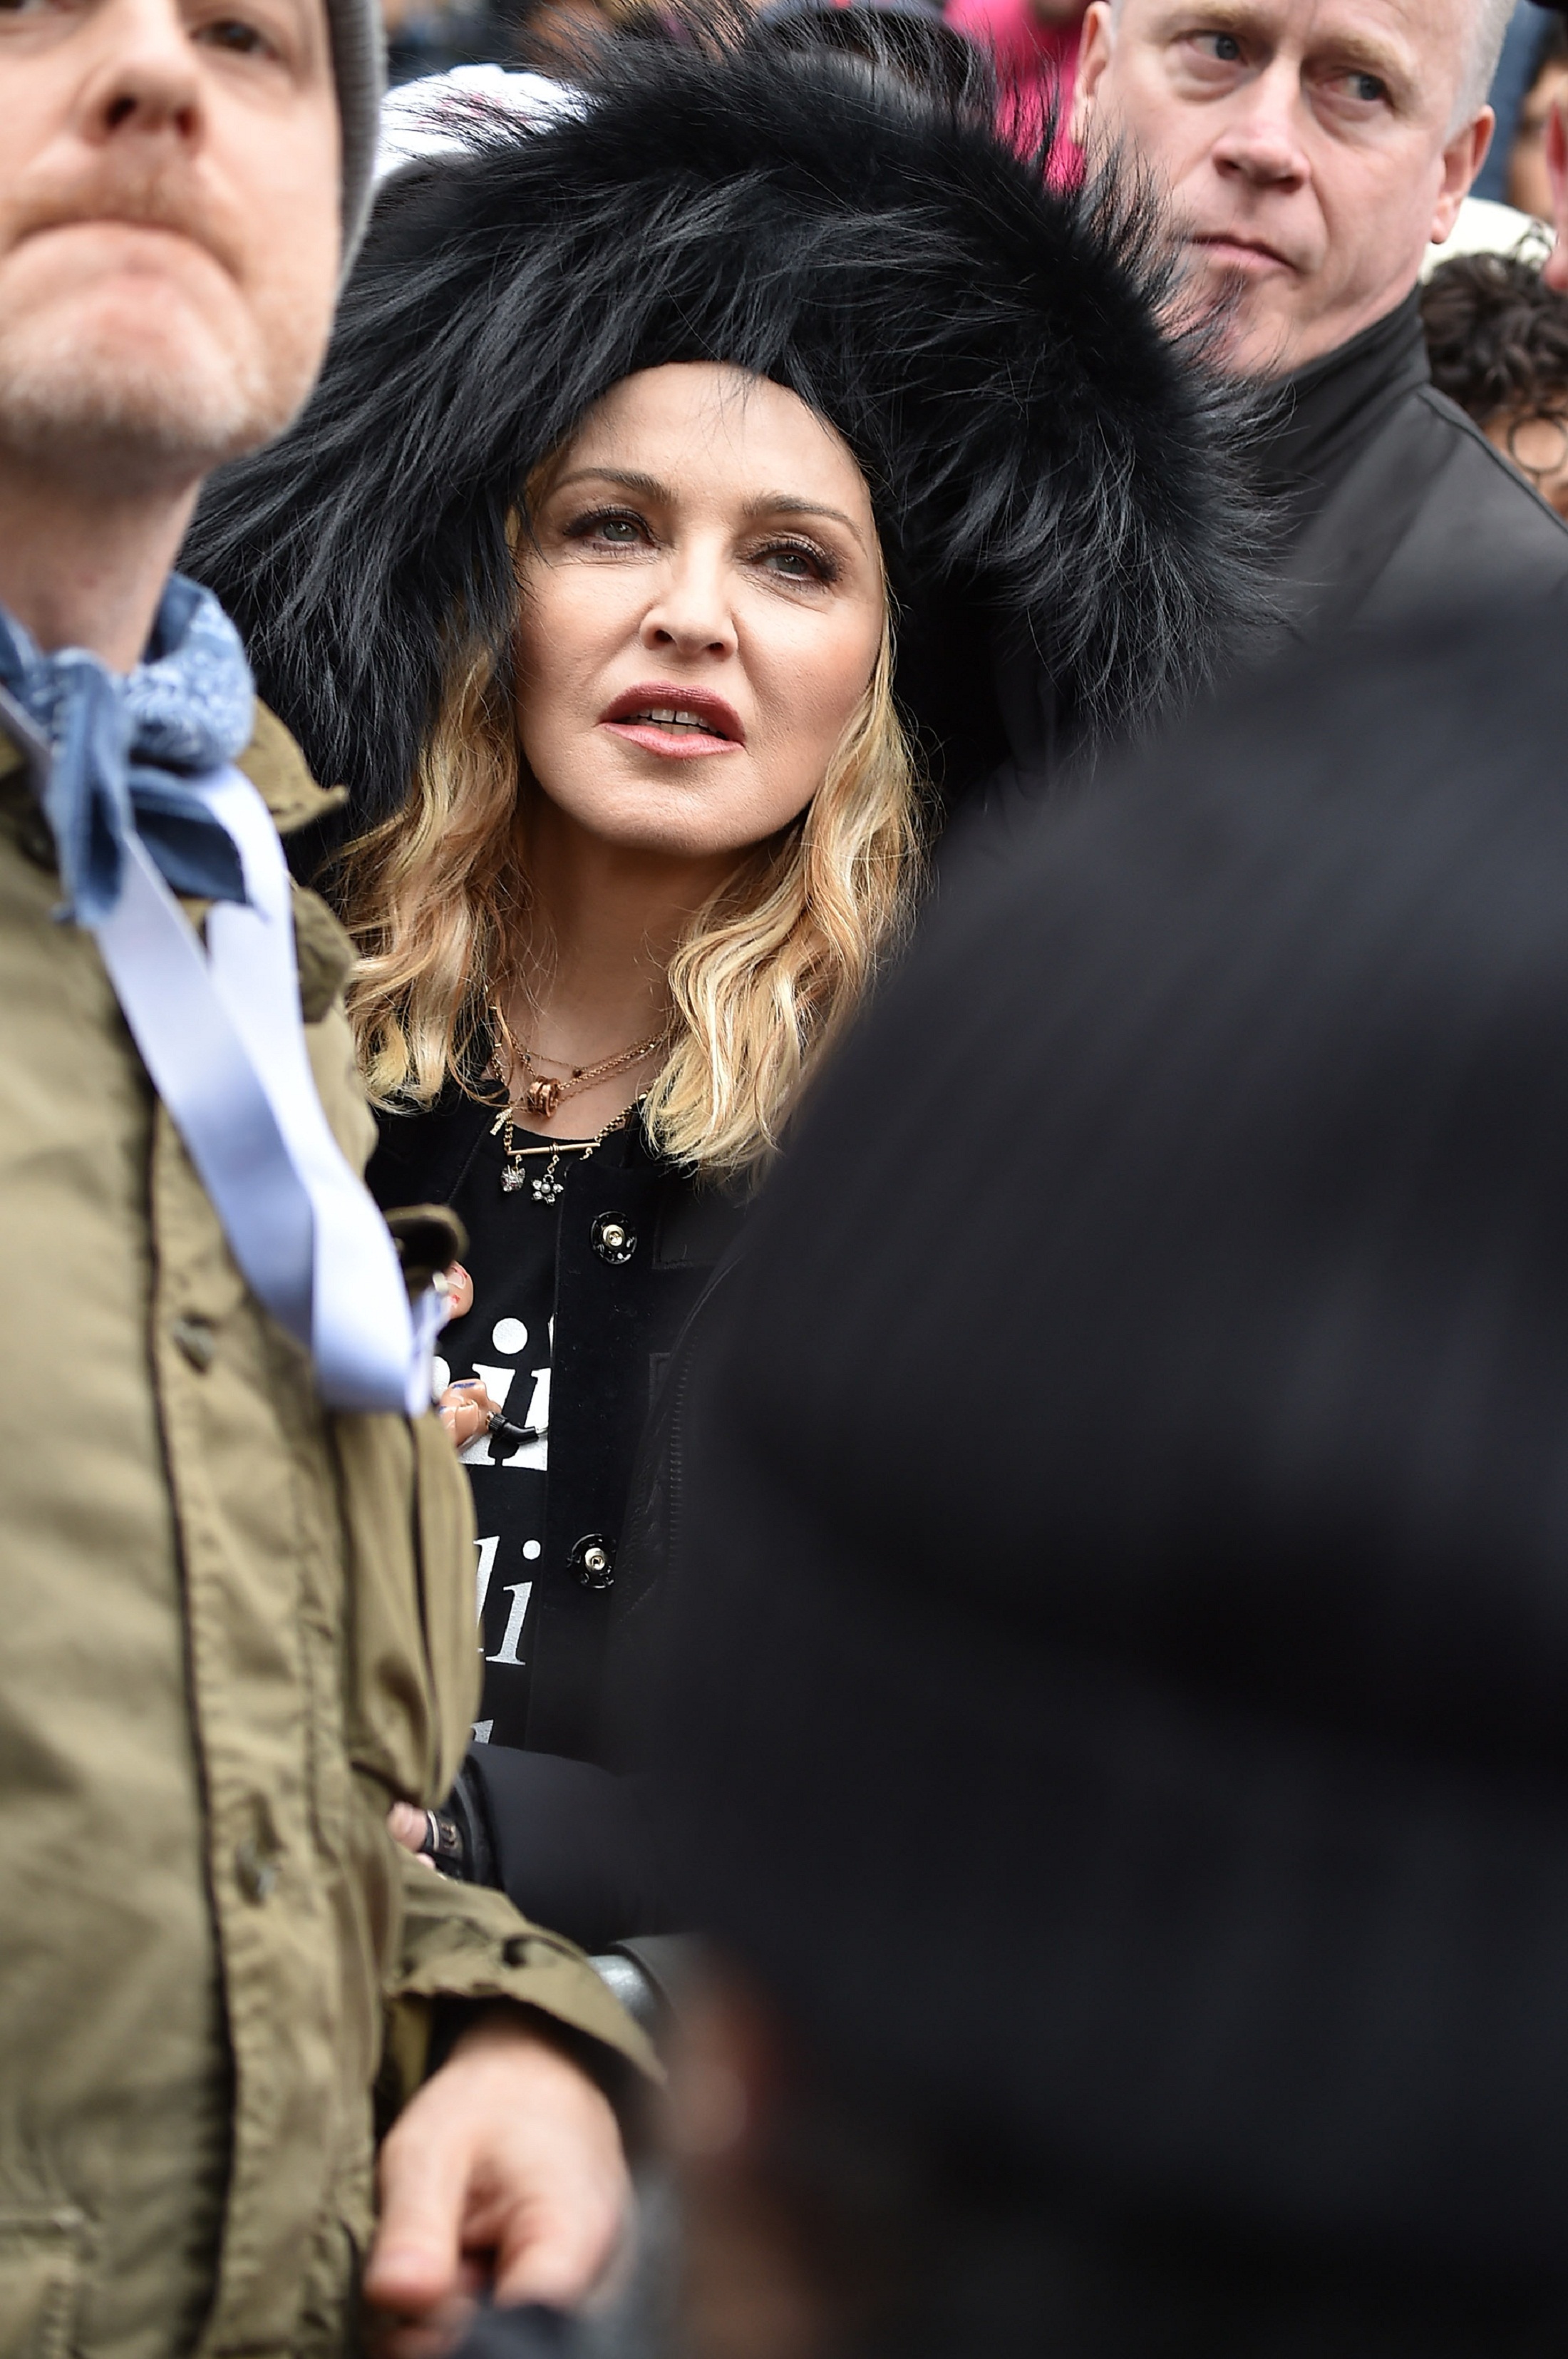 WASHINGTON, DC - JANUARY 21: Madonna attends the Women's March on Washington on January 21, 2017 in Washington, DC.   Theo Wargo/Getty Images/AFP